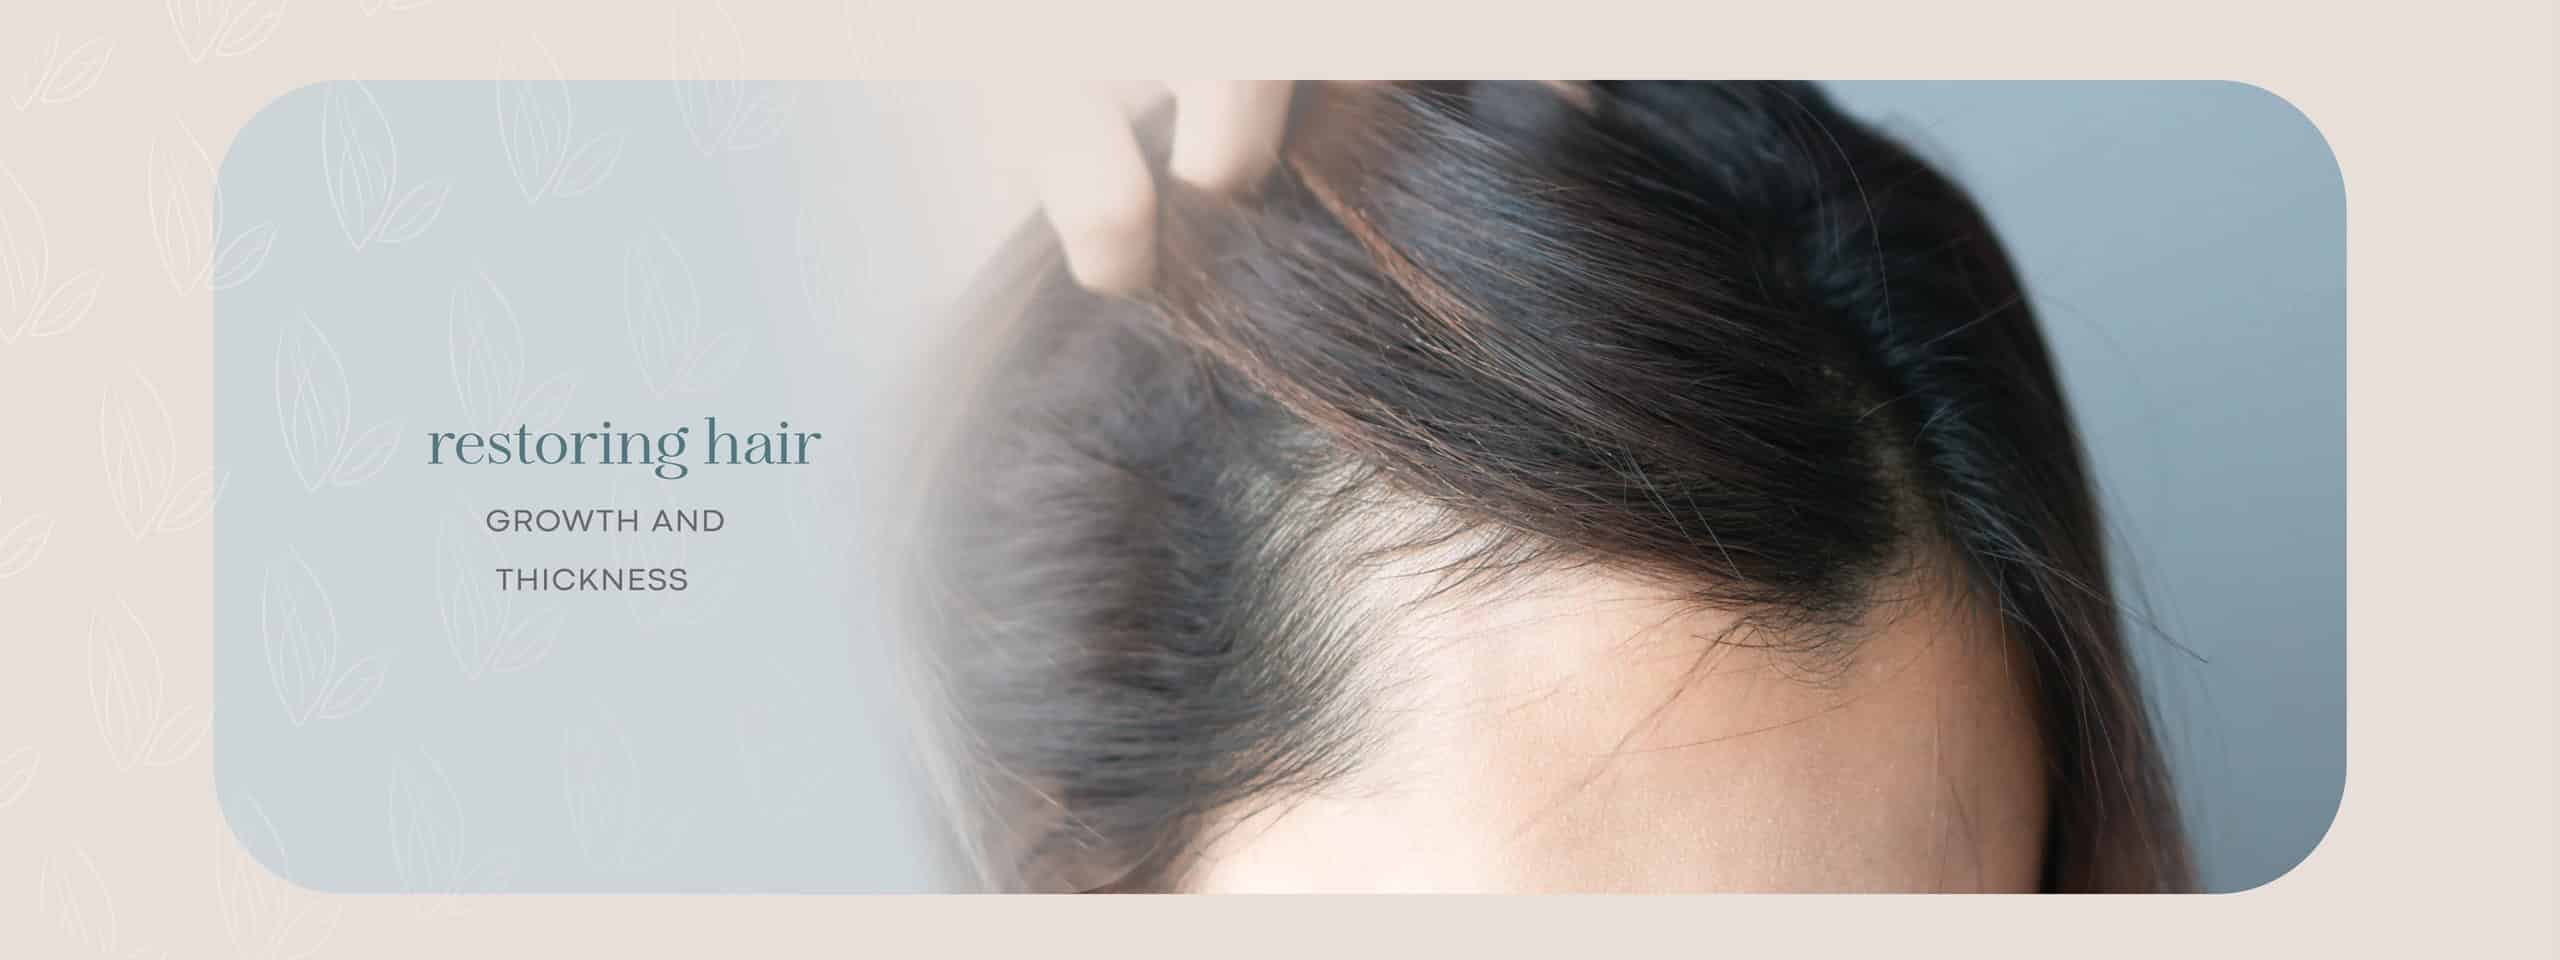 Hair Restoration from FBT Faith in Beauty Medical Aesthetics in Medway MA